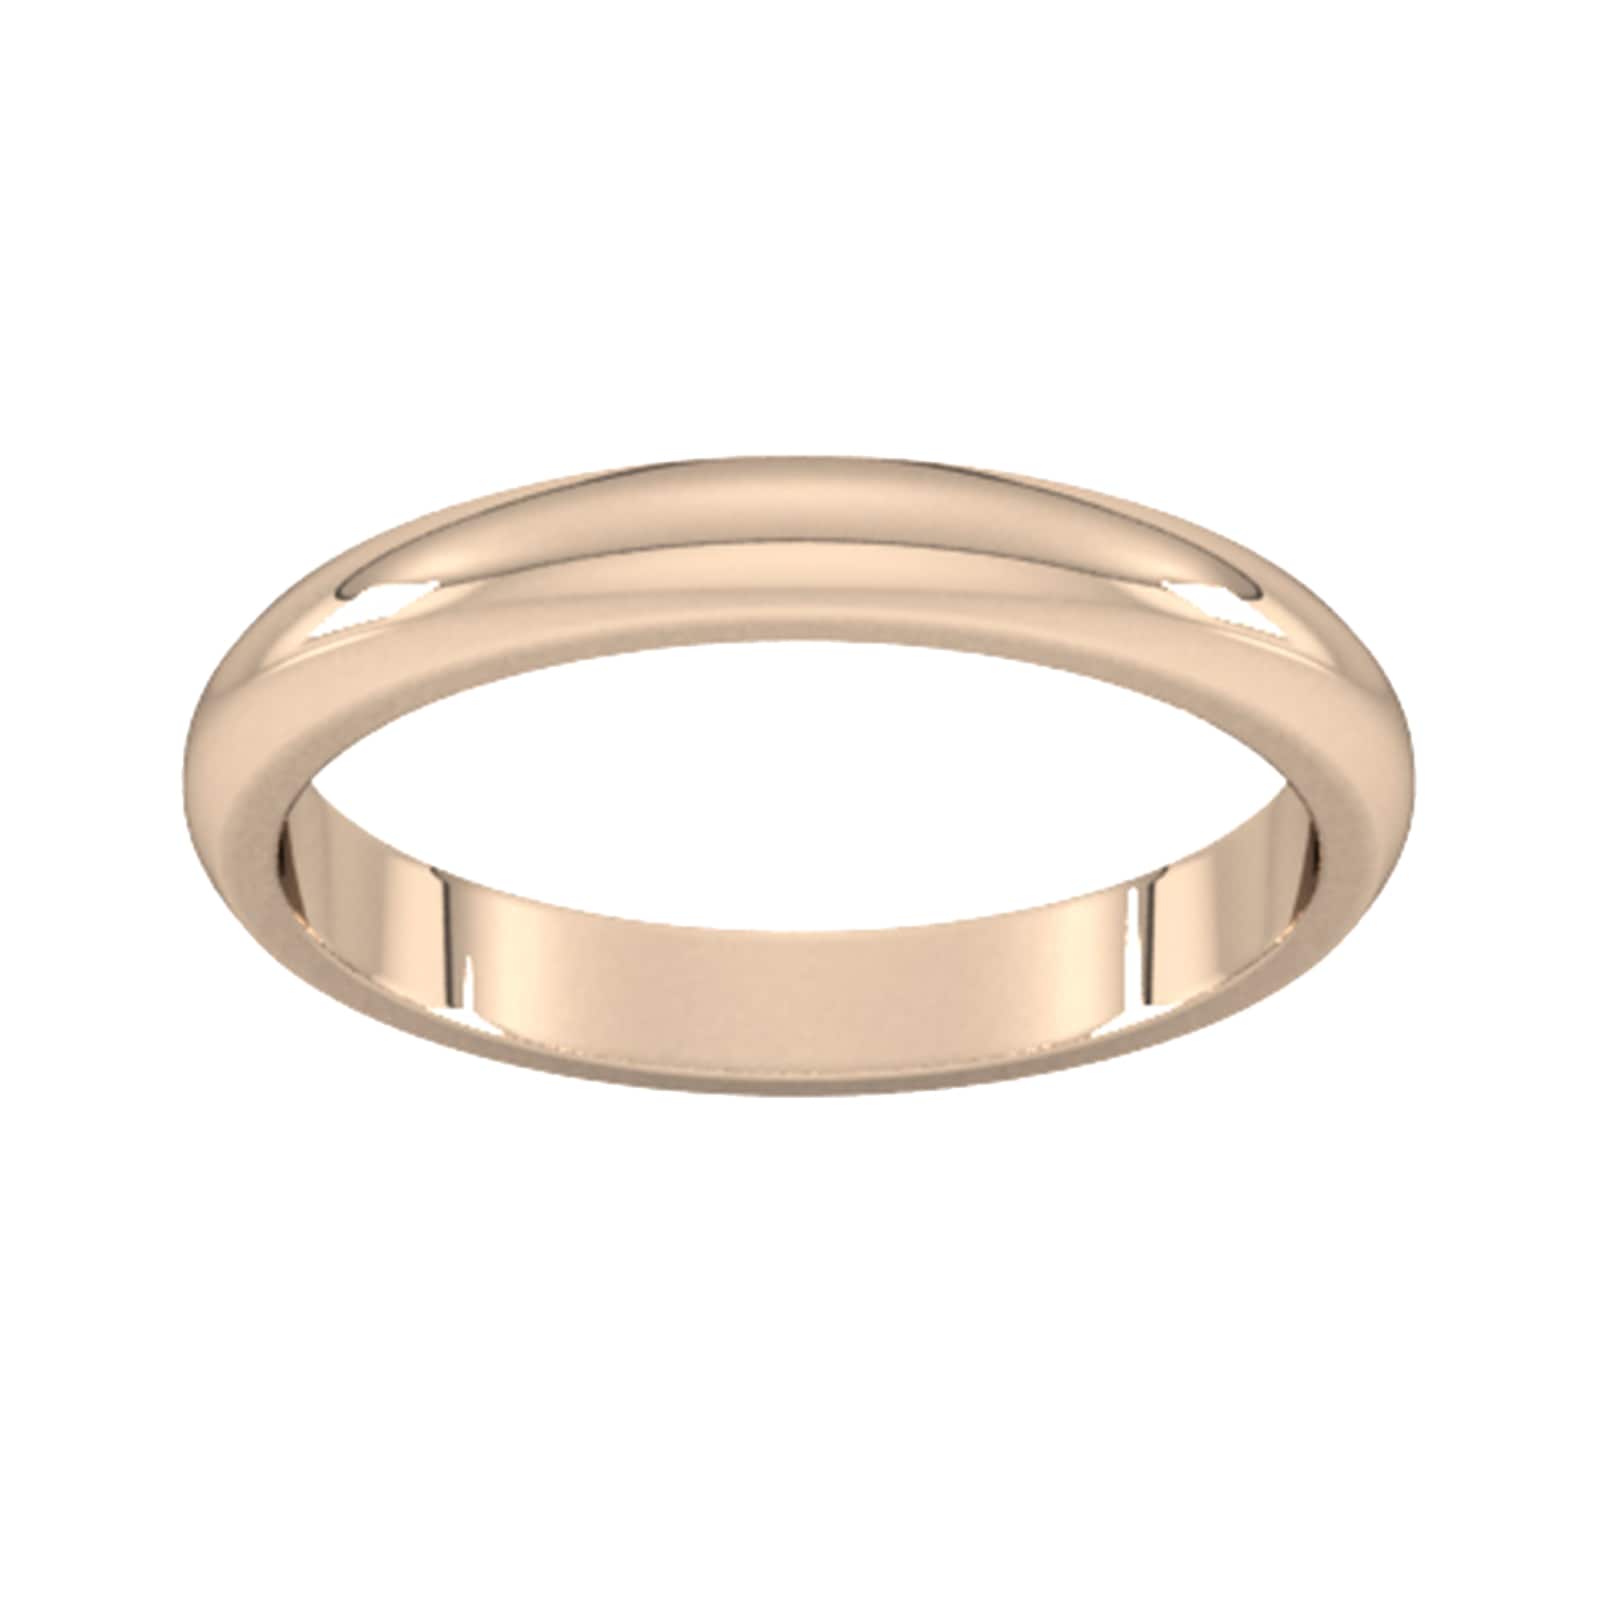 3mm D Shape Heavy Wedding Ring In 9 Carat Rose Gold - Ring Size N